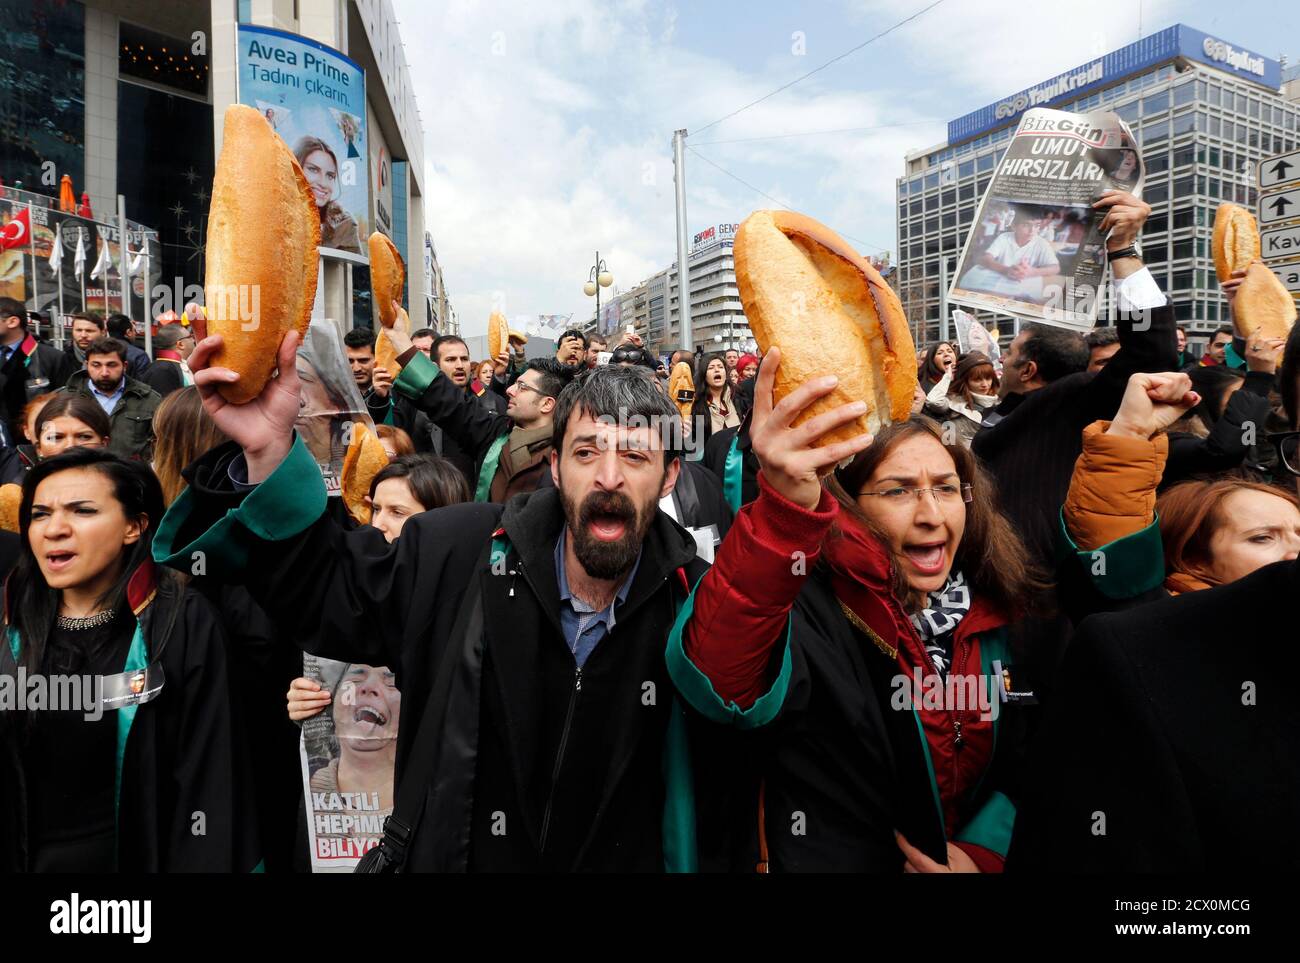 Anti-government protesters carry bread during a demonstration marking the funeral of Berkin Elvan in Ankara March 12, 2014. Several thousand mourners gathered in central Istanbul and Ankara on Wednesday for the funeral of Elvan, a 15-year-old boy wounded during anti-government demonstrations last summer whose death on Tuesday triggered protests across Turkey. Elvan, then aged 14, got caught up in street battles in Istanbul between police and protesters on June 16, 2013 while going to buy bread for his family. REUTERS/Umit Bektas (TURKEY  - Tags: POLITICS CIVIL UNREST) Stock Photo